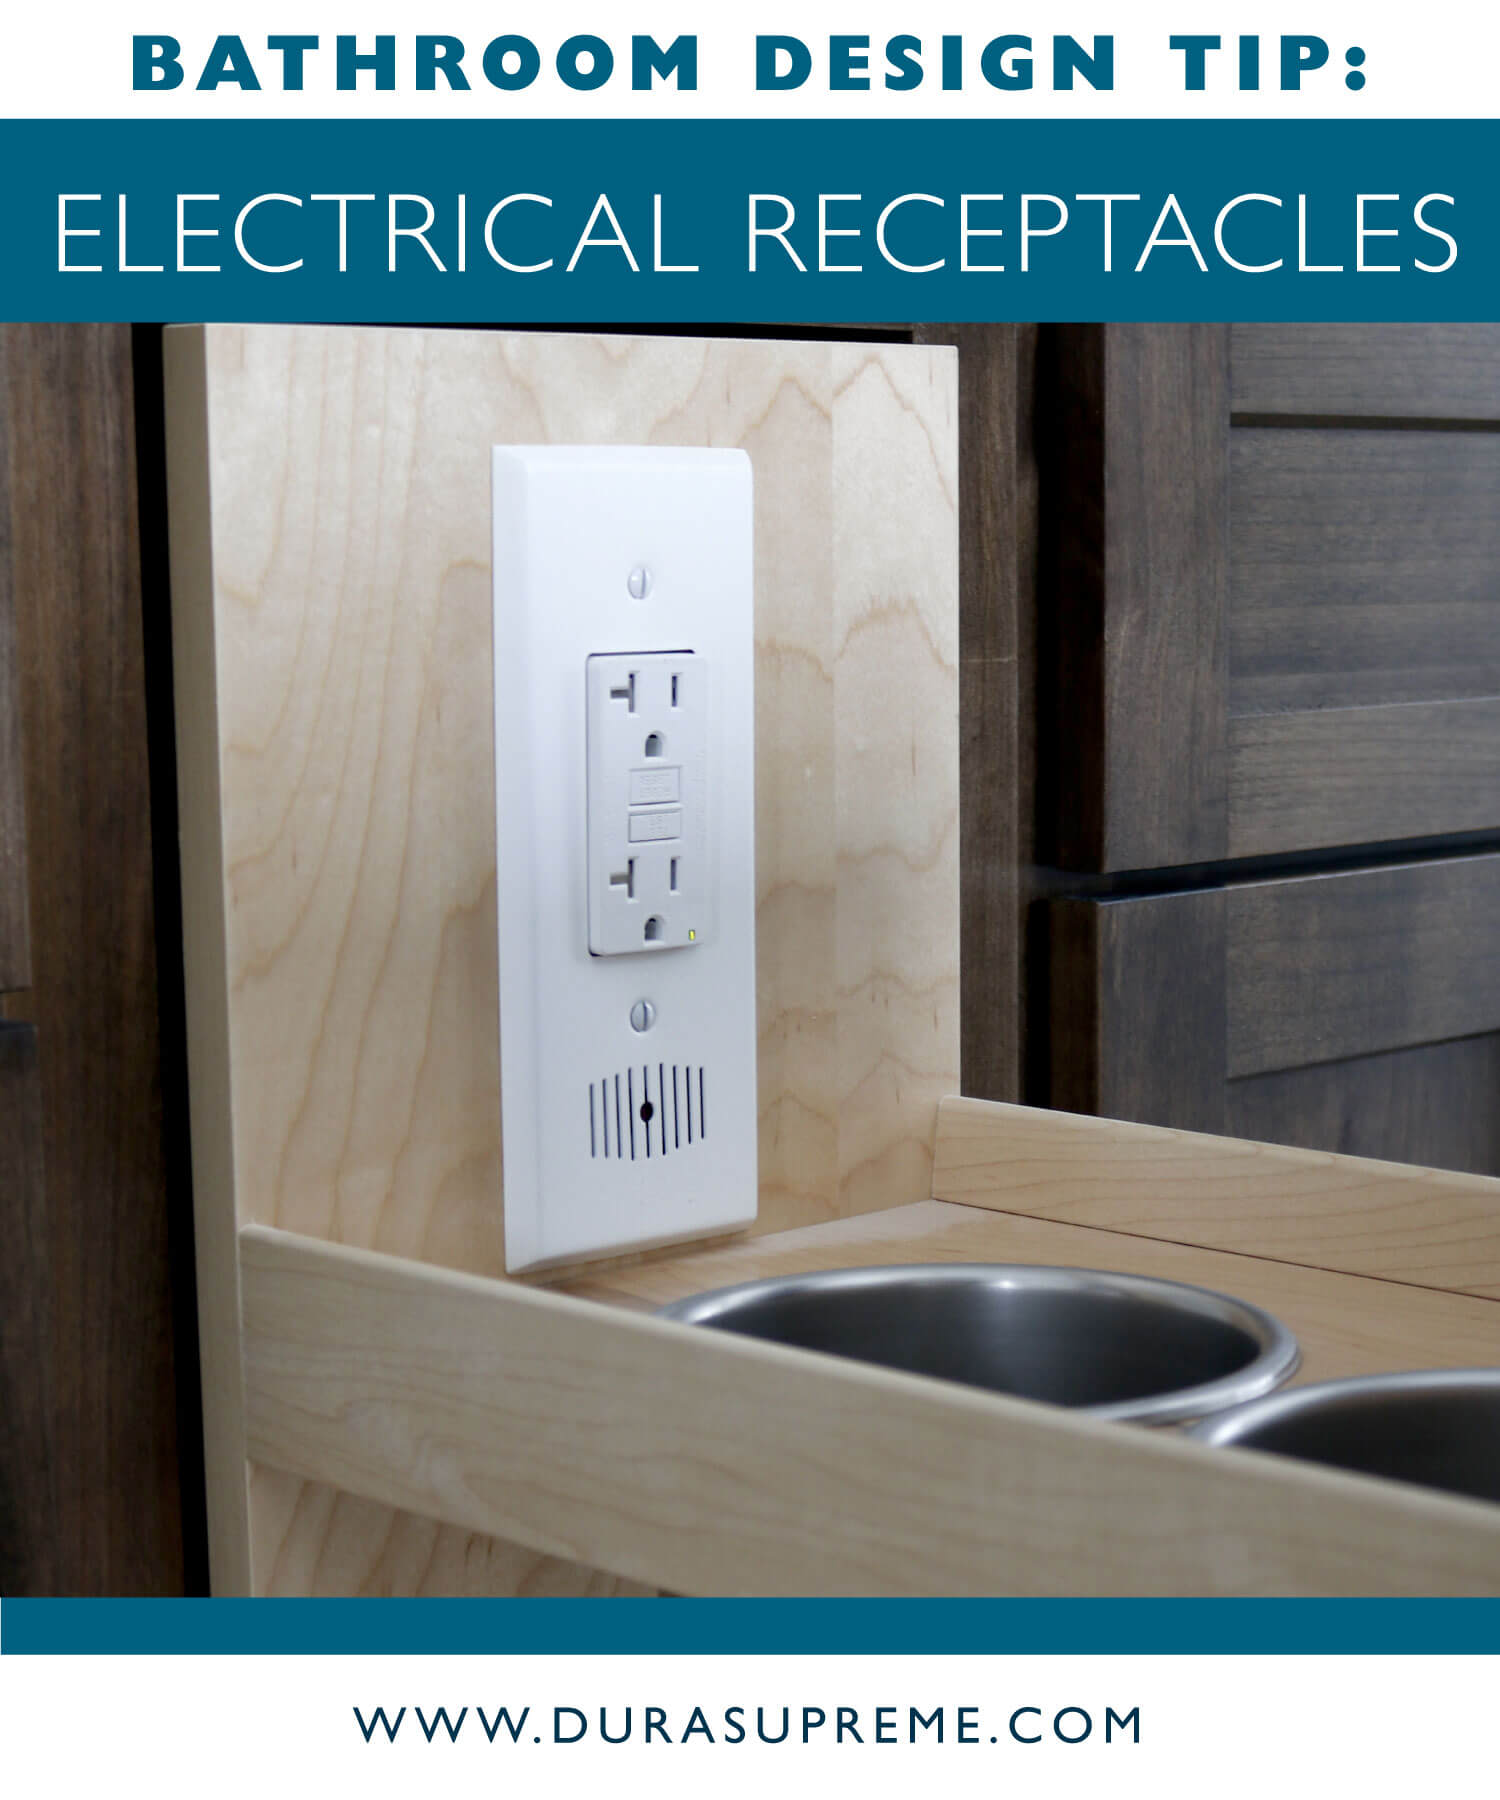 Bathroom Design Tips and Best Practices for Electrical Outlets. Guidelines fro Electrical Receptacles in the Bathroom.